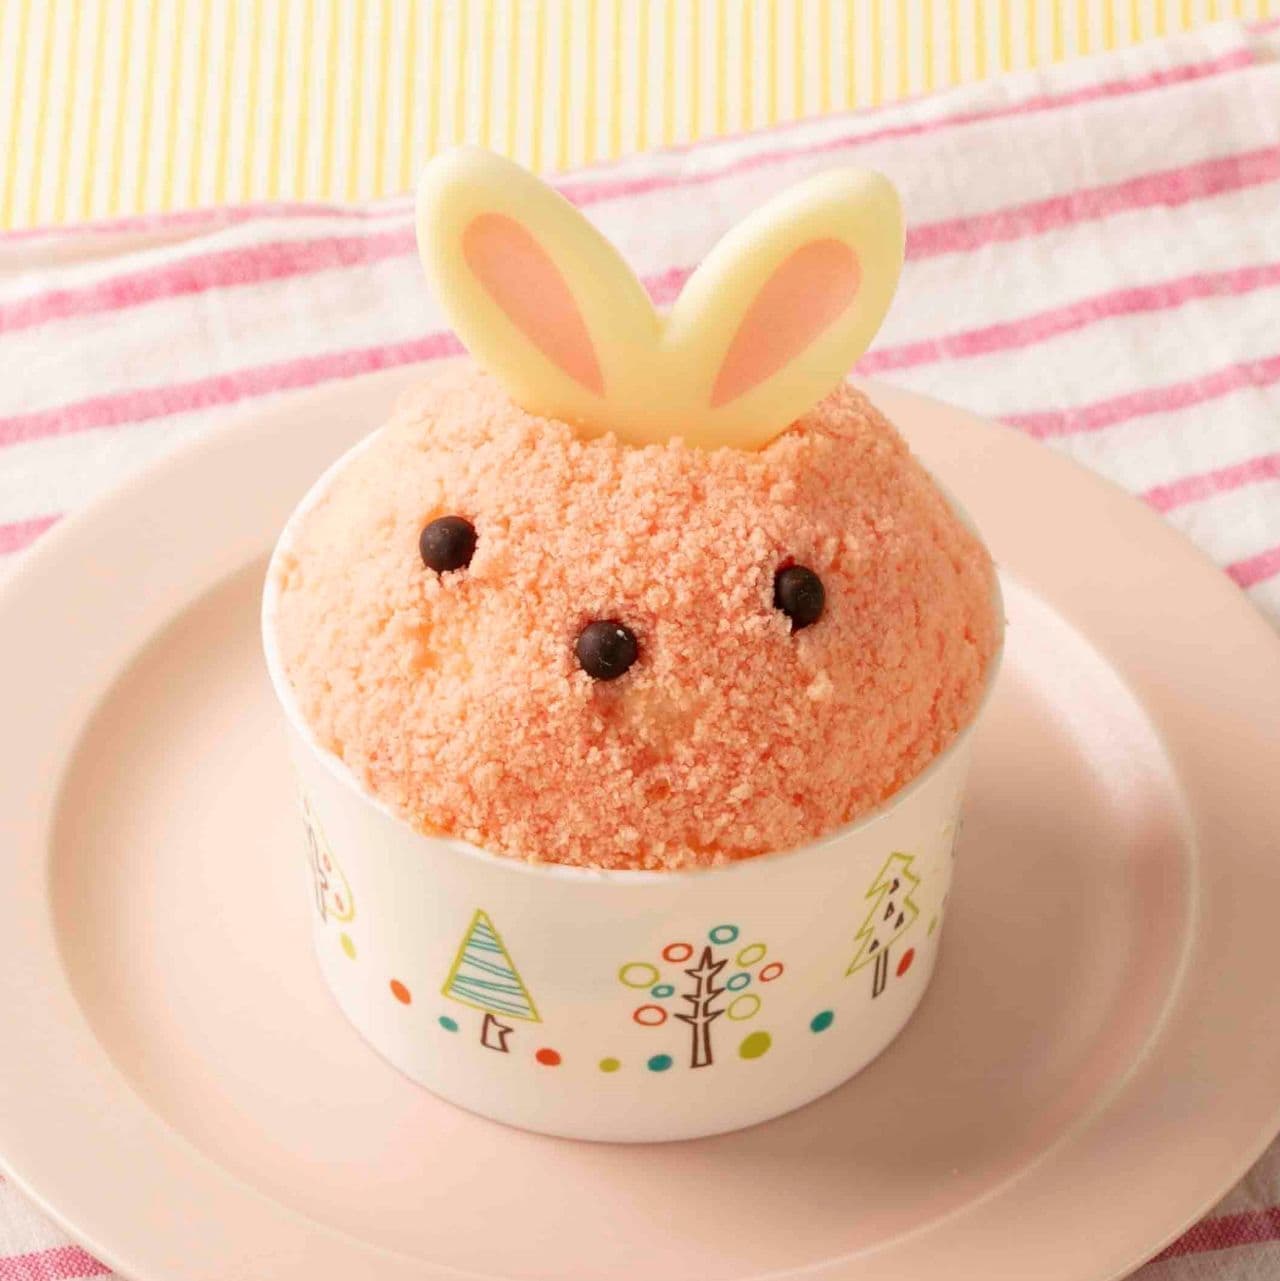 Chateraise "Easter cute bunny".